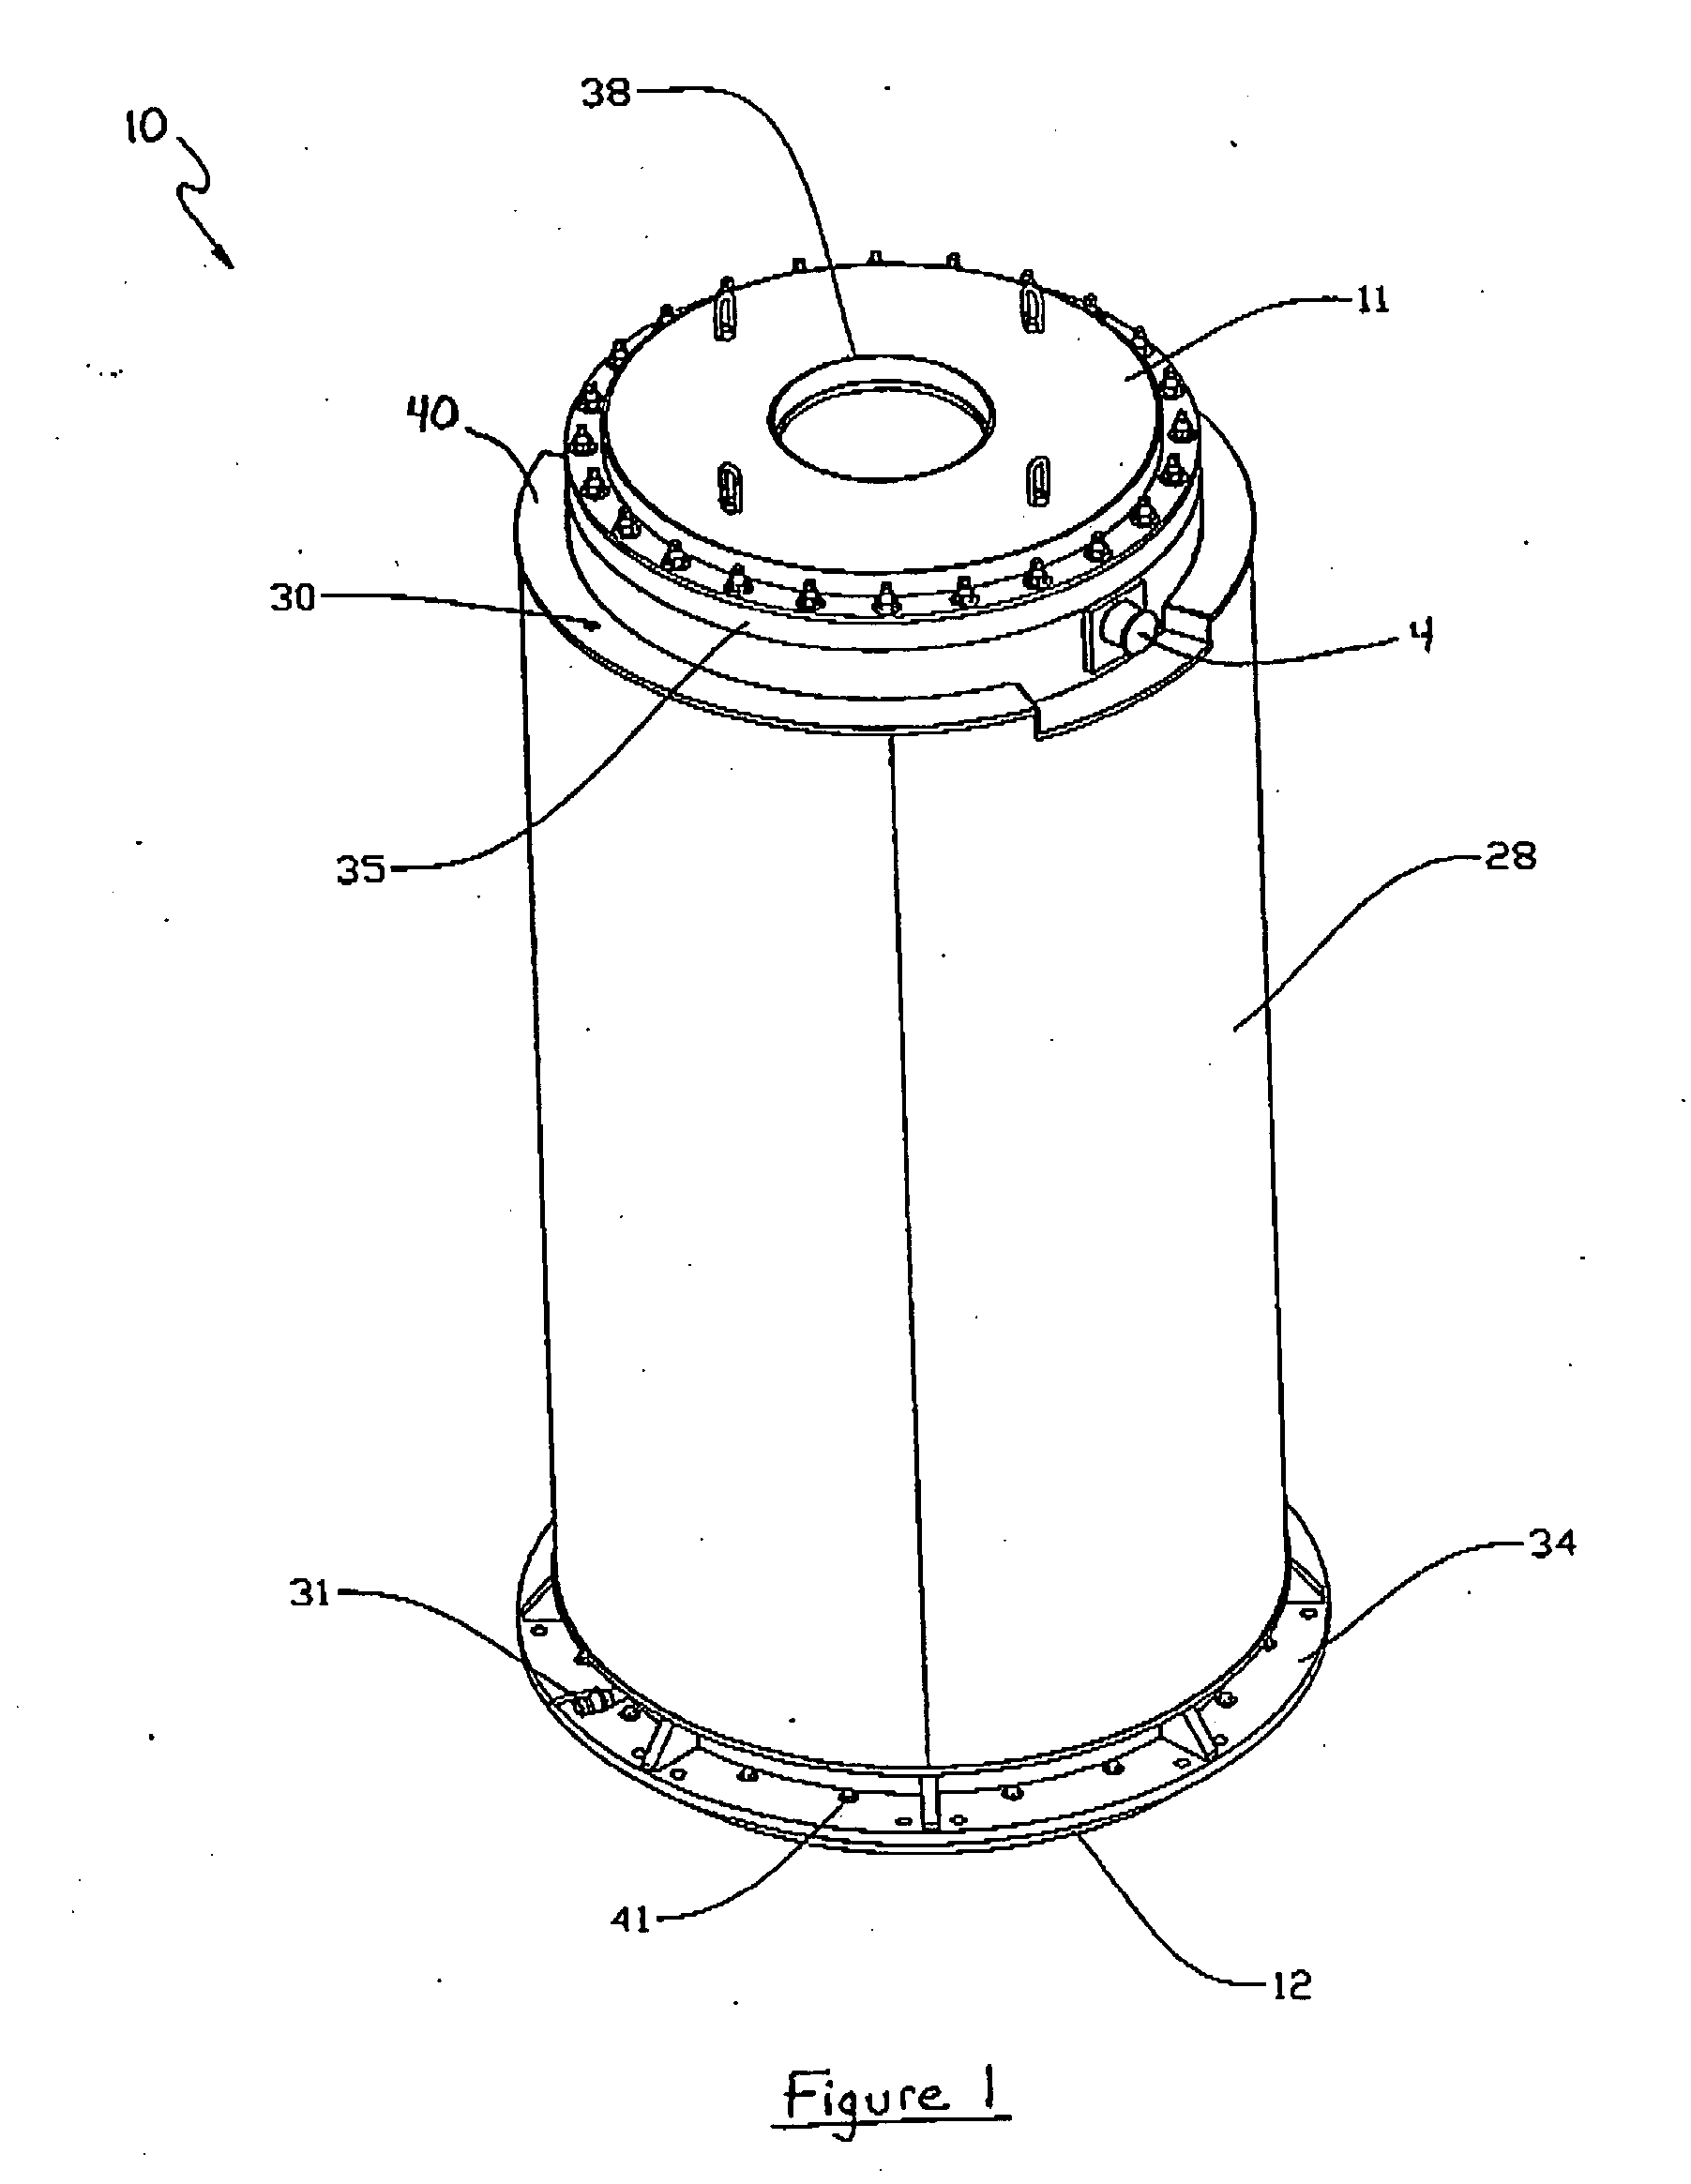 Method and apparatus for maximizing radiation shielding during cask transfer procedures